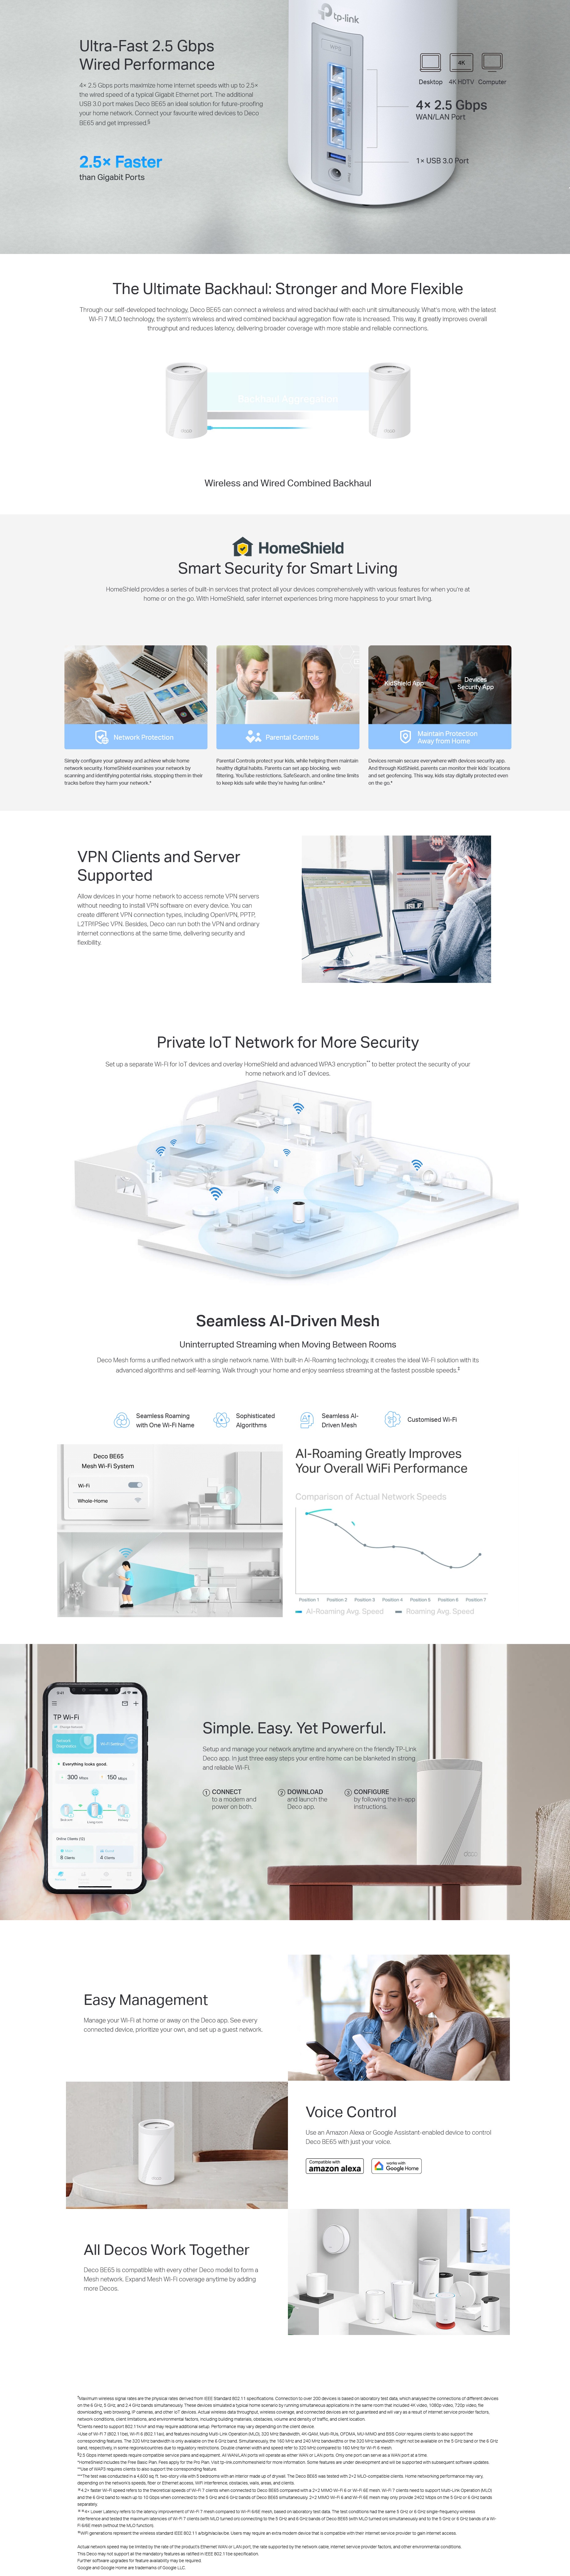 A large marketing image providing additional information about the product TP-Link Deco BE65 - BE11000 Wi-Fi 7 Tri-Band Mesh System (2 Pack) - Additional alt info not provided